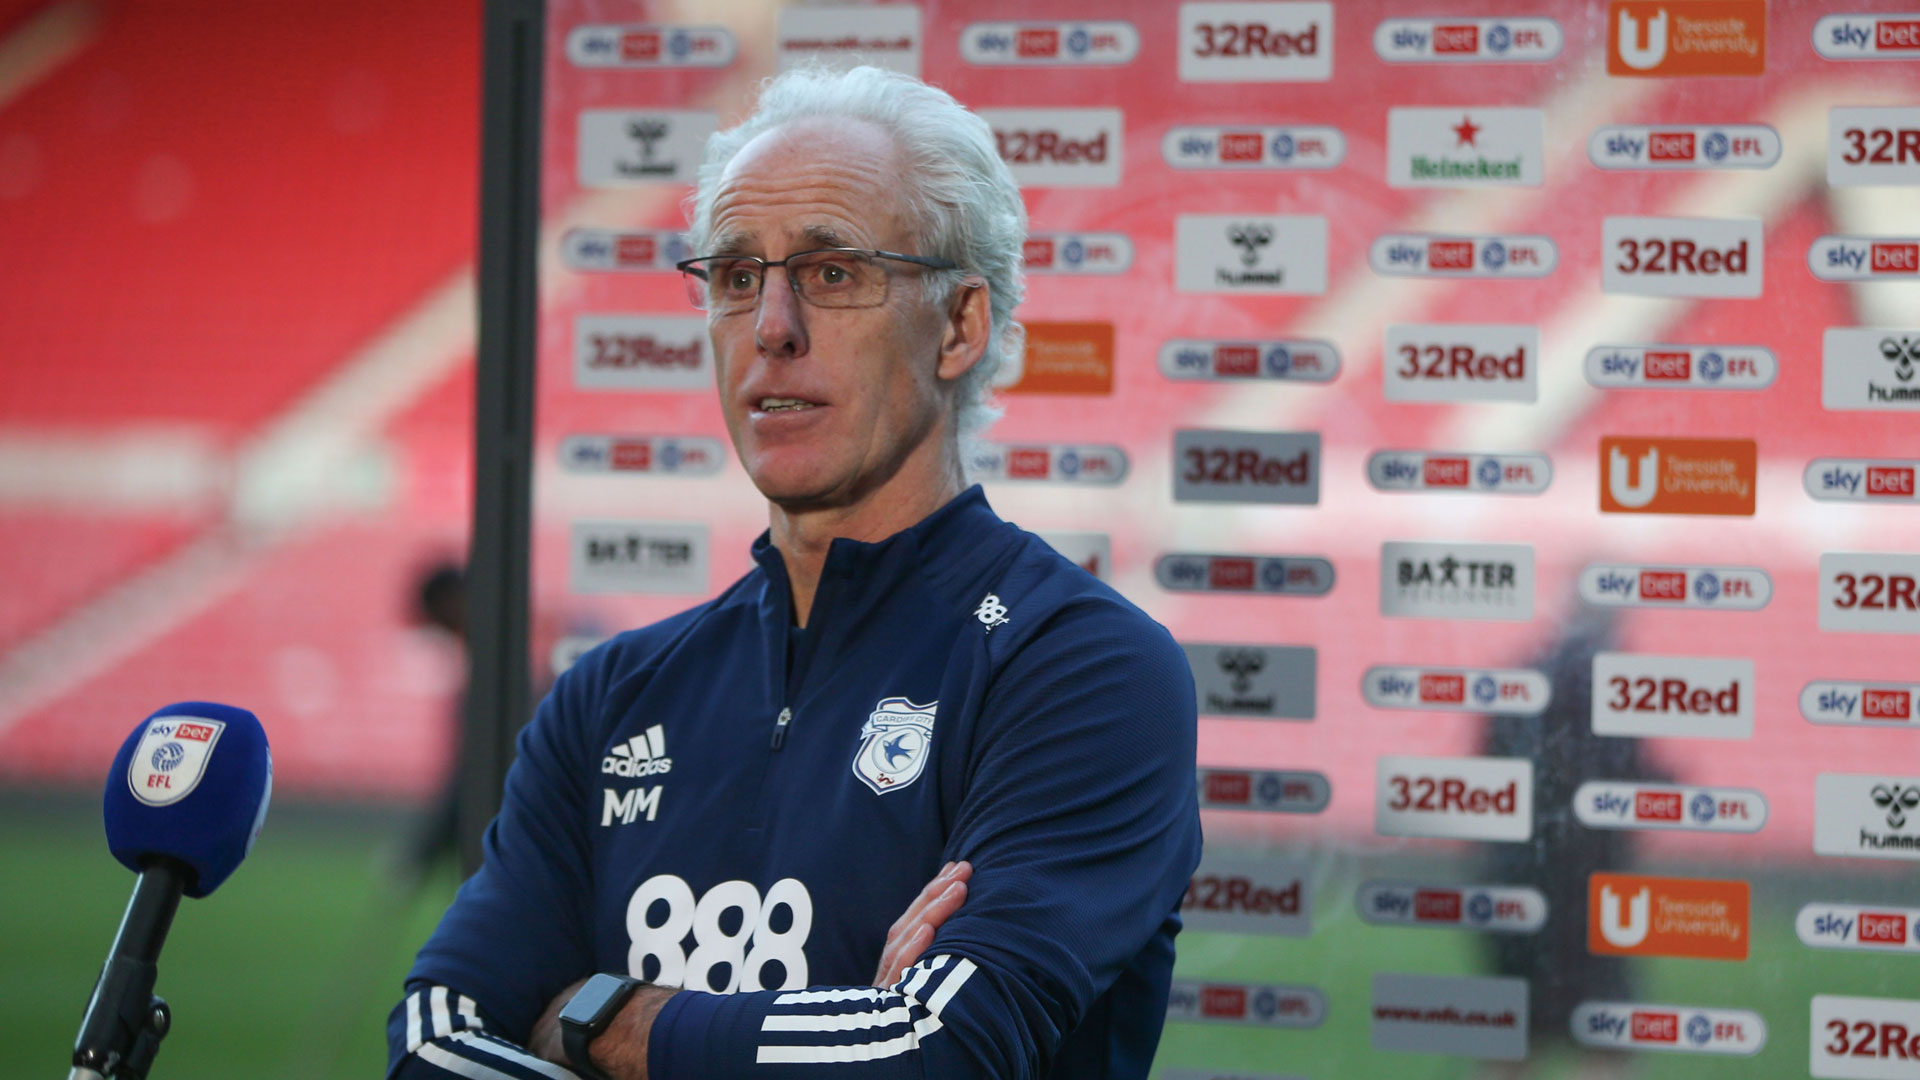 City boss Mick McCarthy after the match at Middlesbrough...